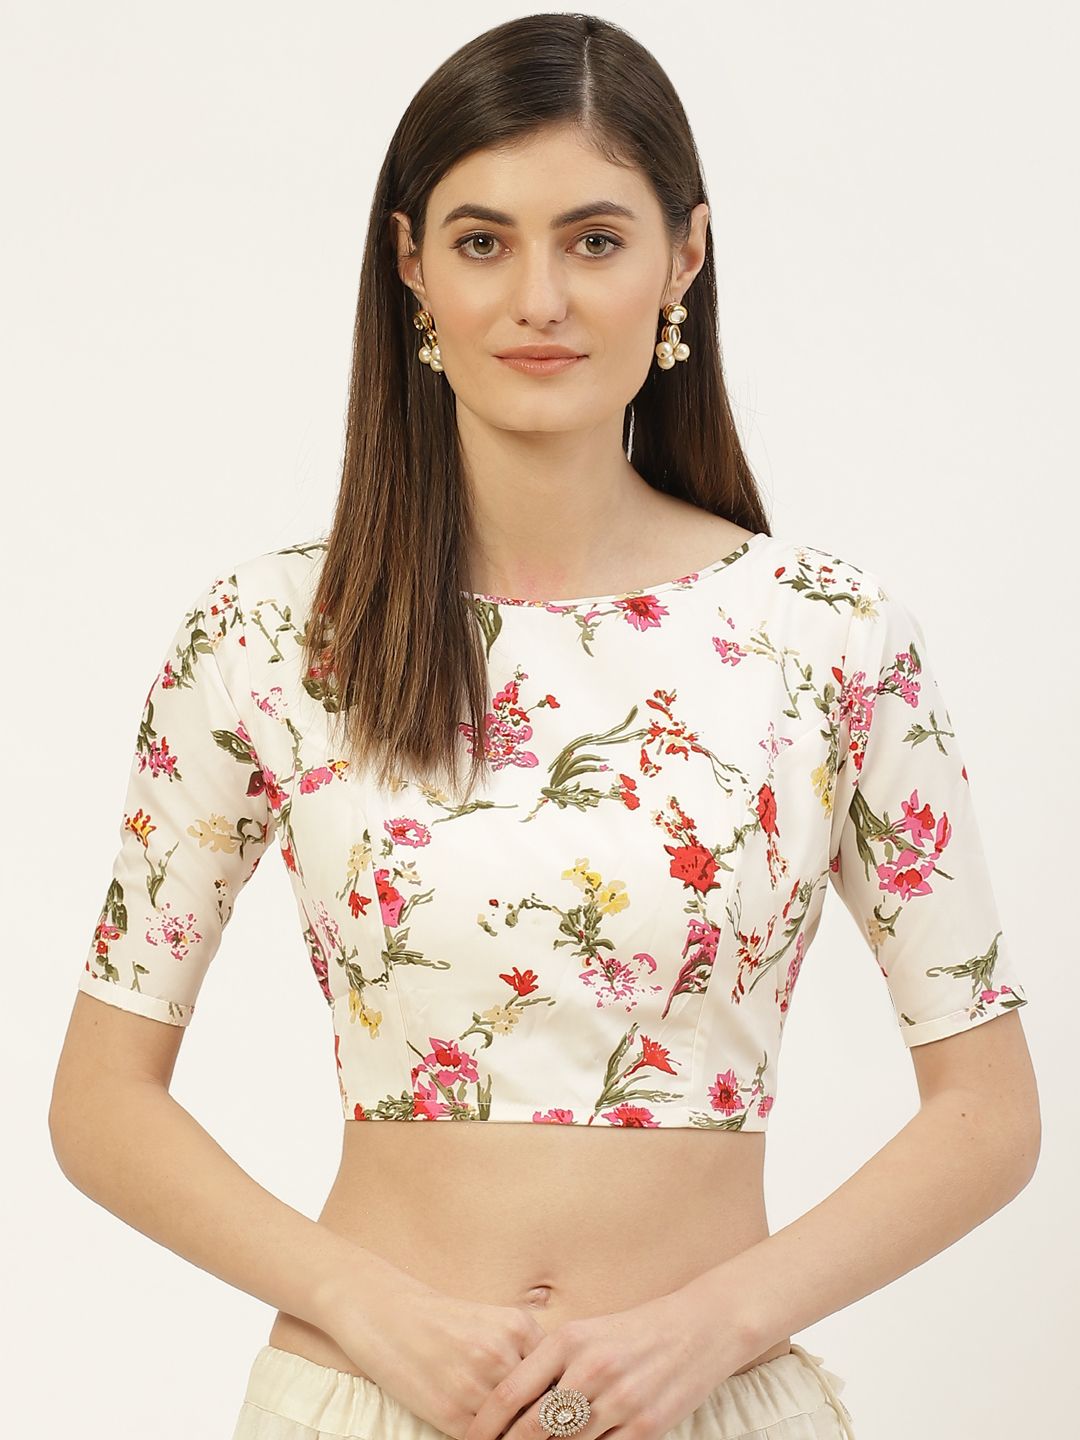 Studio Shringaar Off-White & Red Floral Print Saree Blouse Price in India